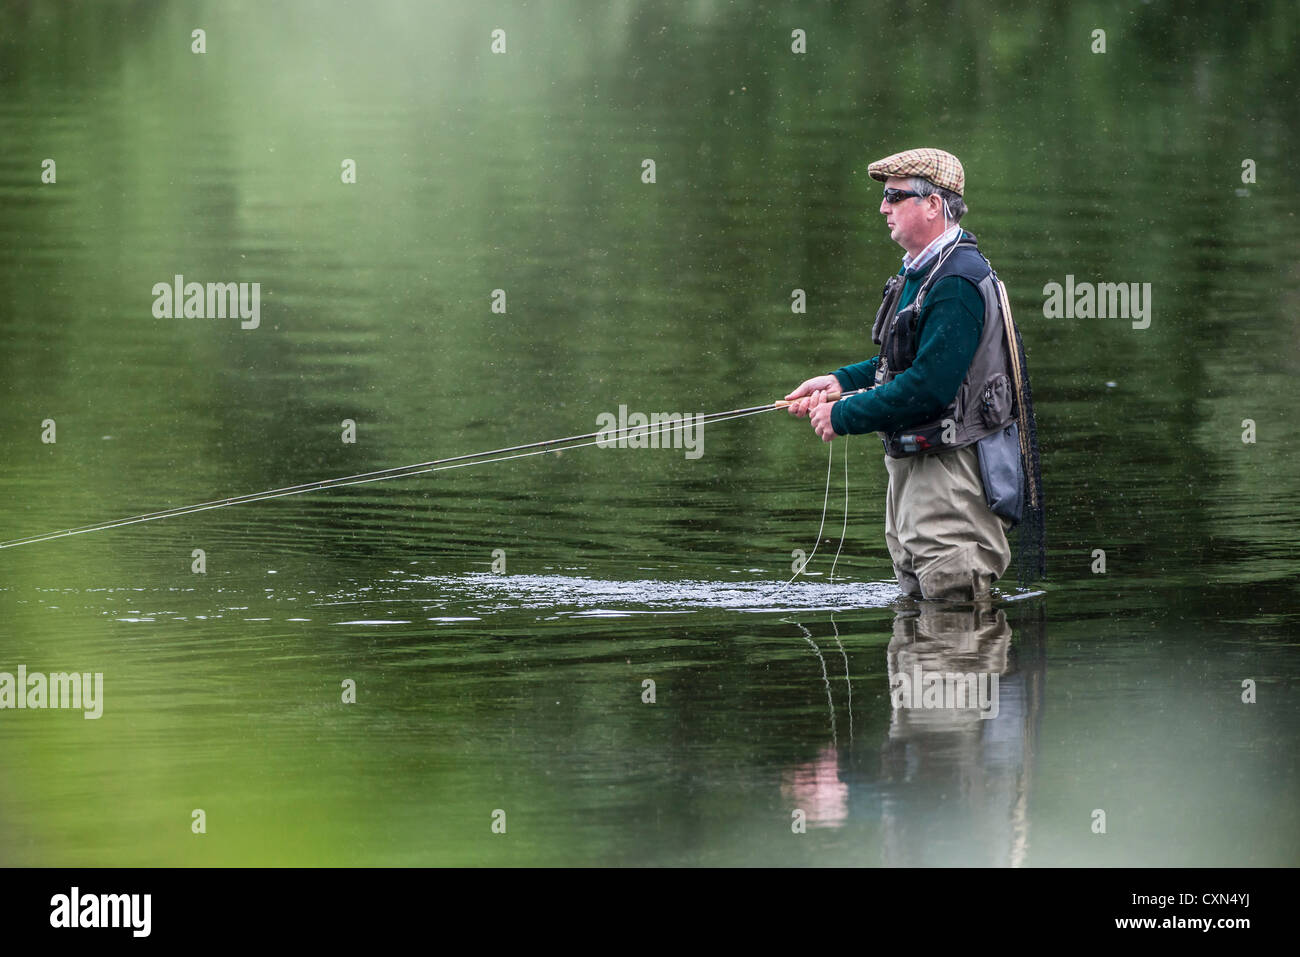 Casting on the River Tweed in June, in Scotland Stock Photo